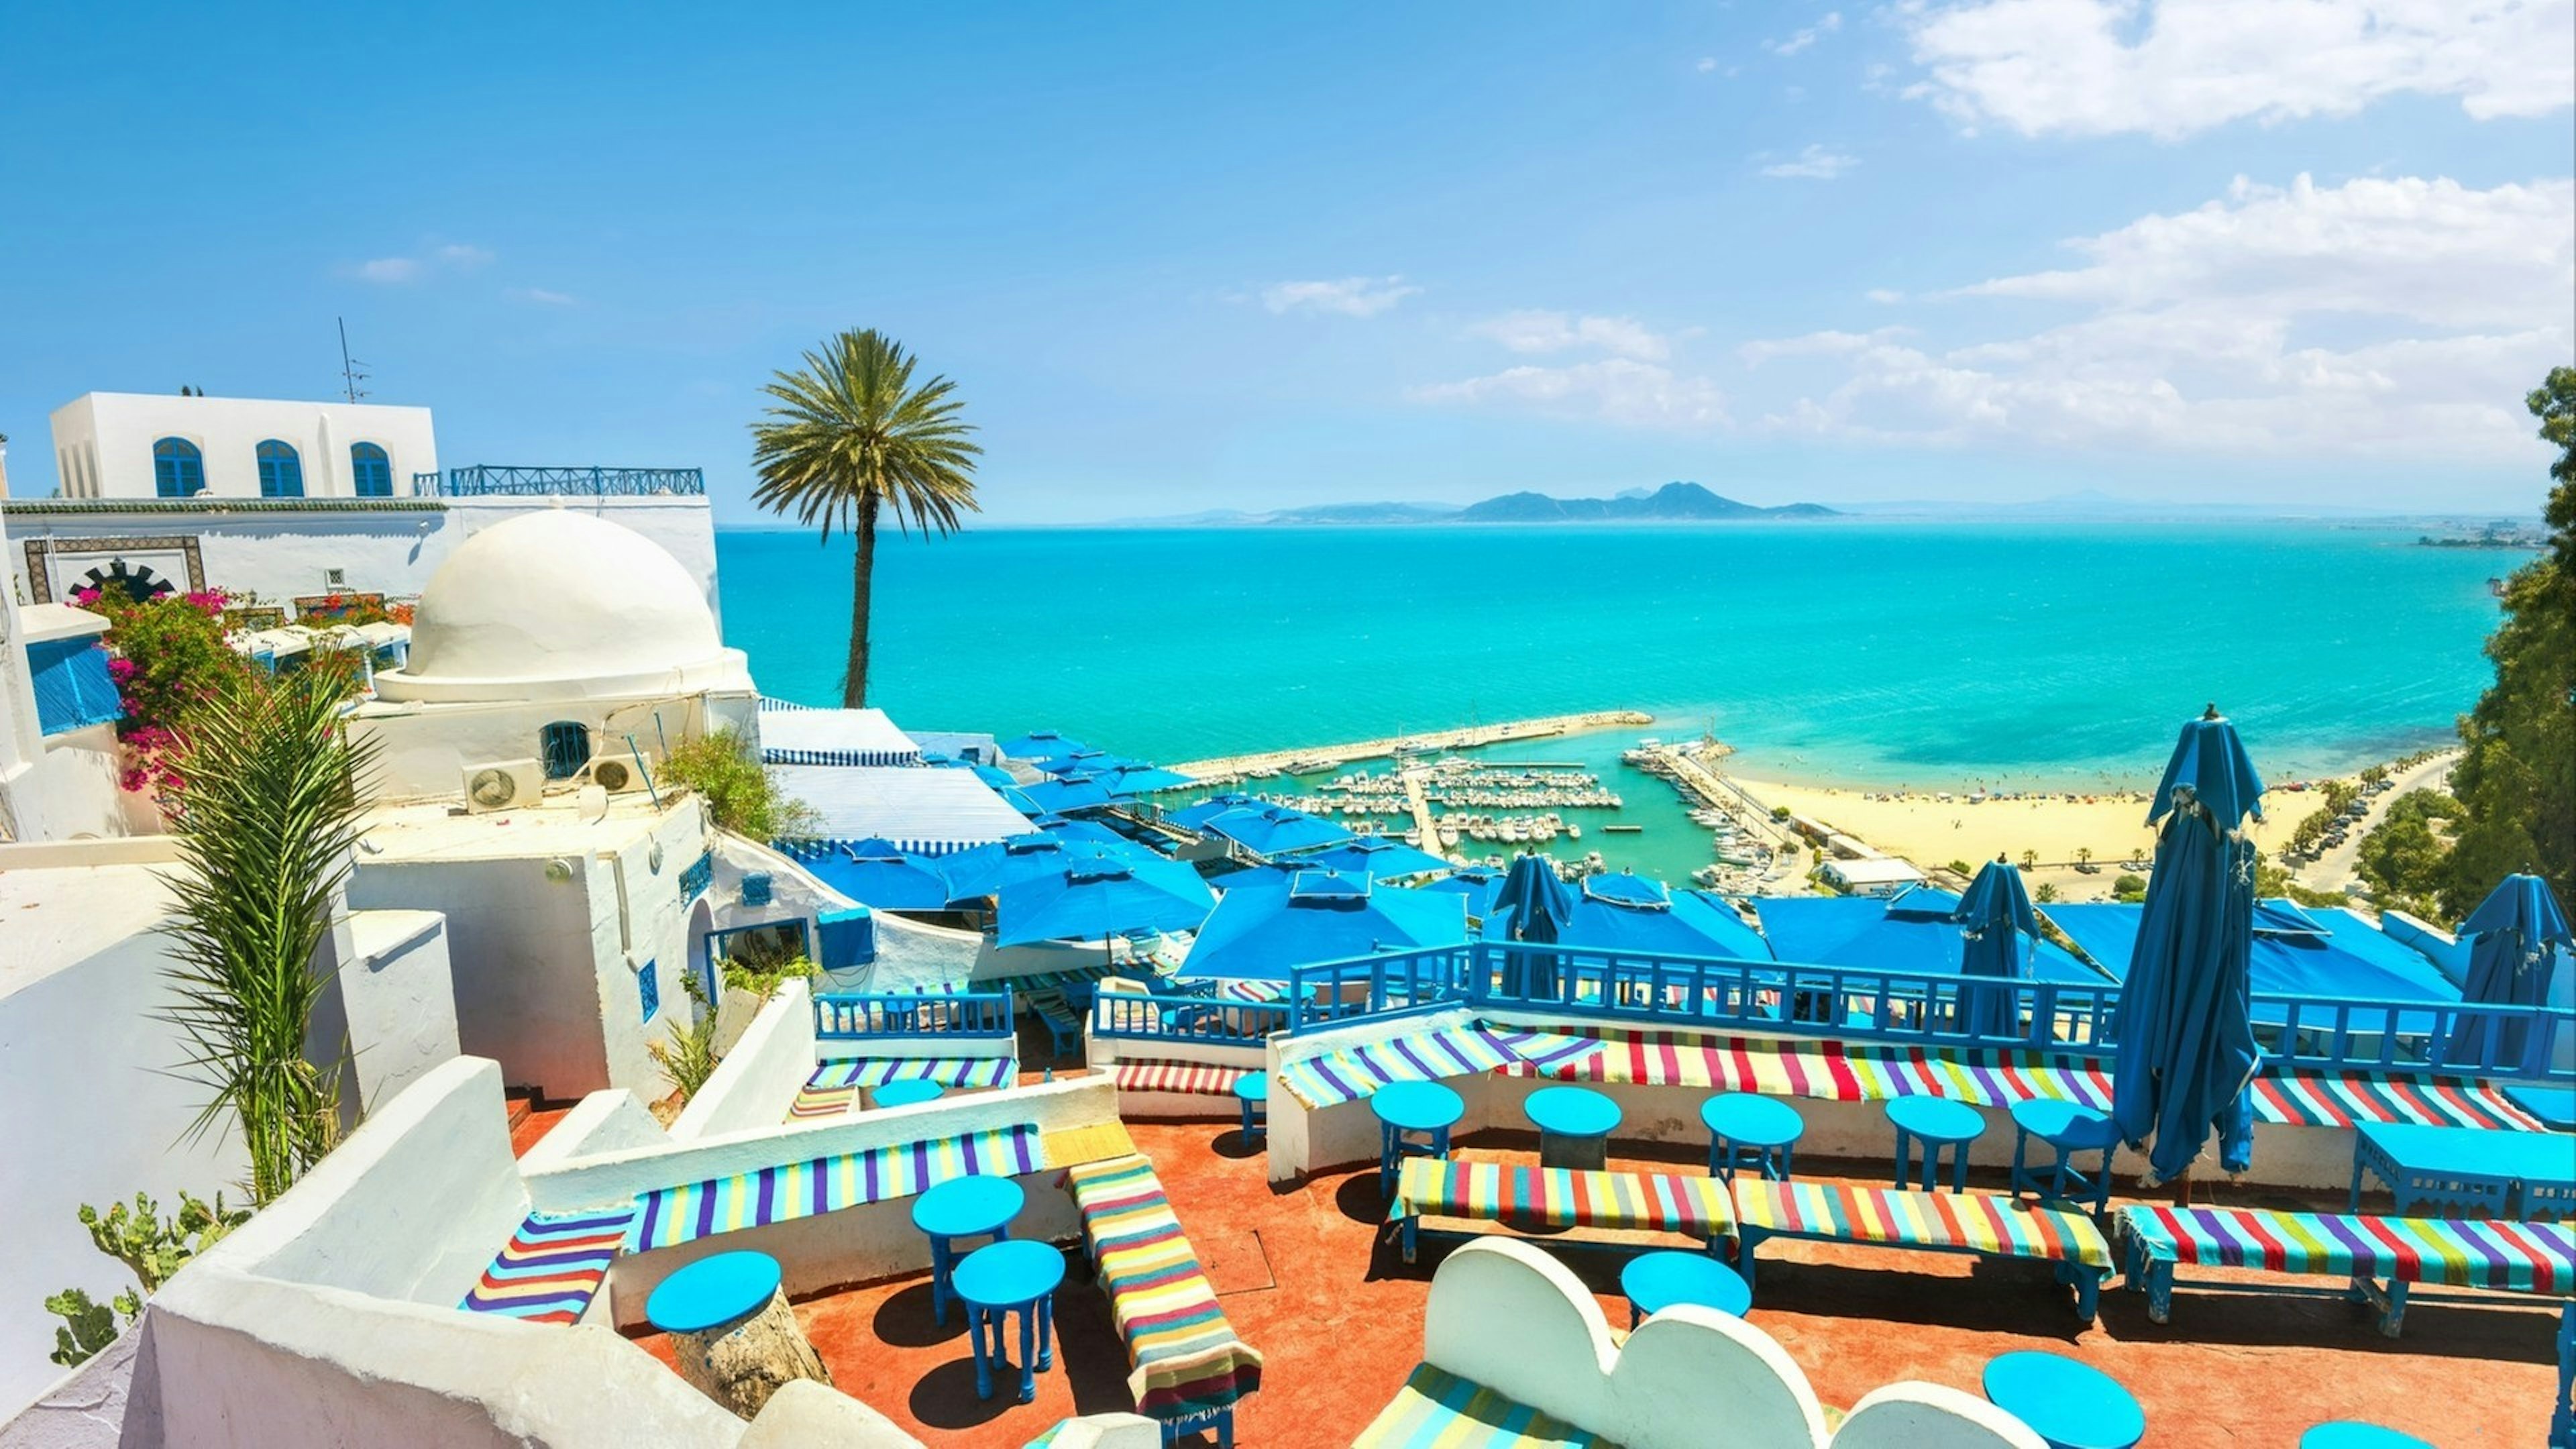 Beautiful view over of seaside and white blue village Sidi Bou Said. Tunisia, North Africa